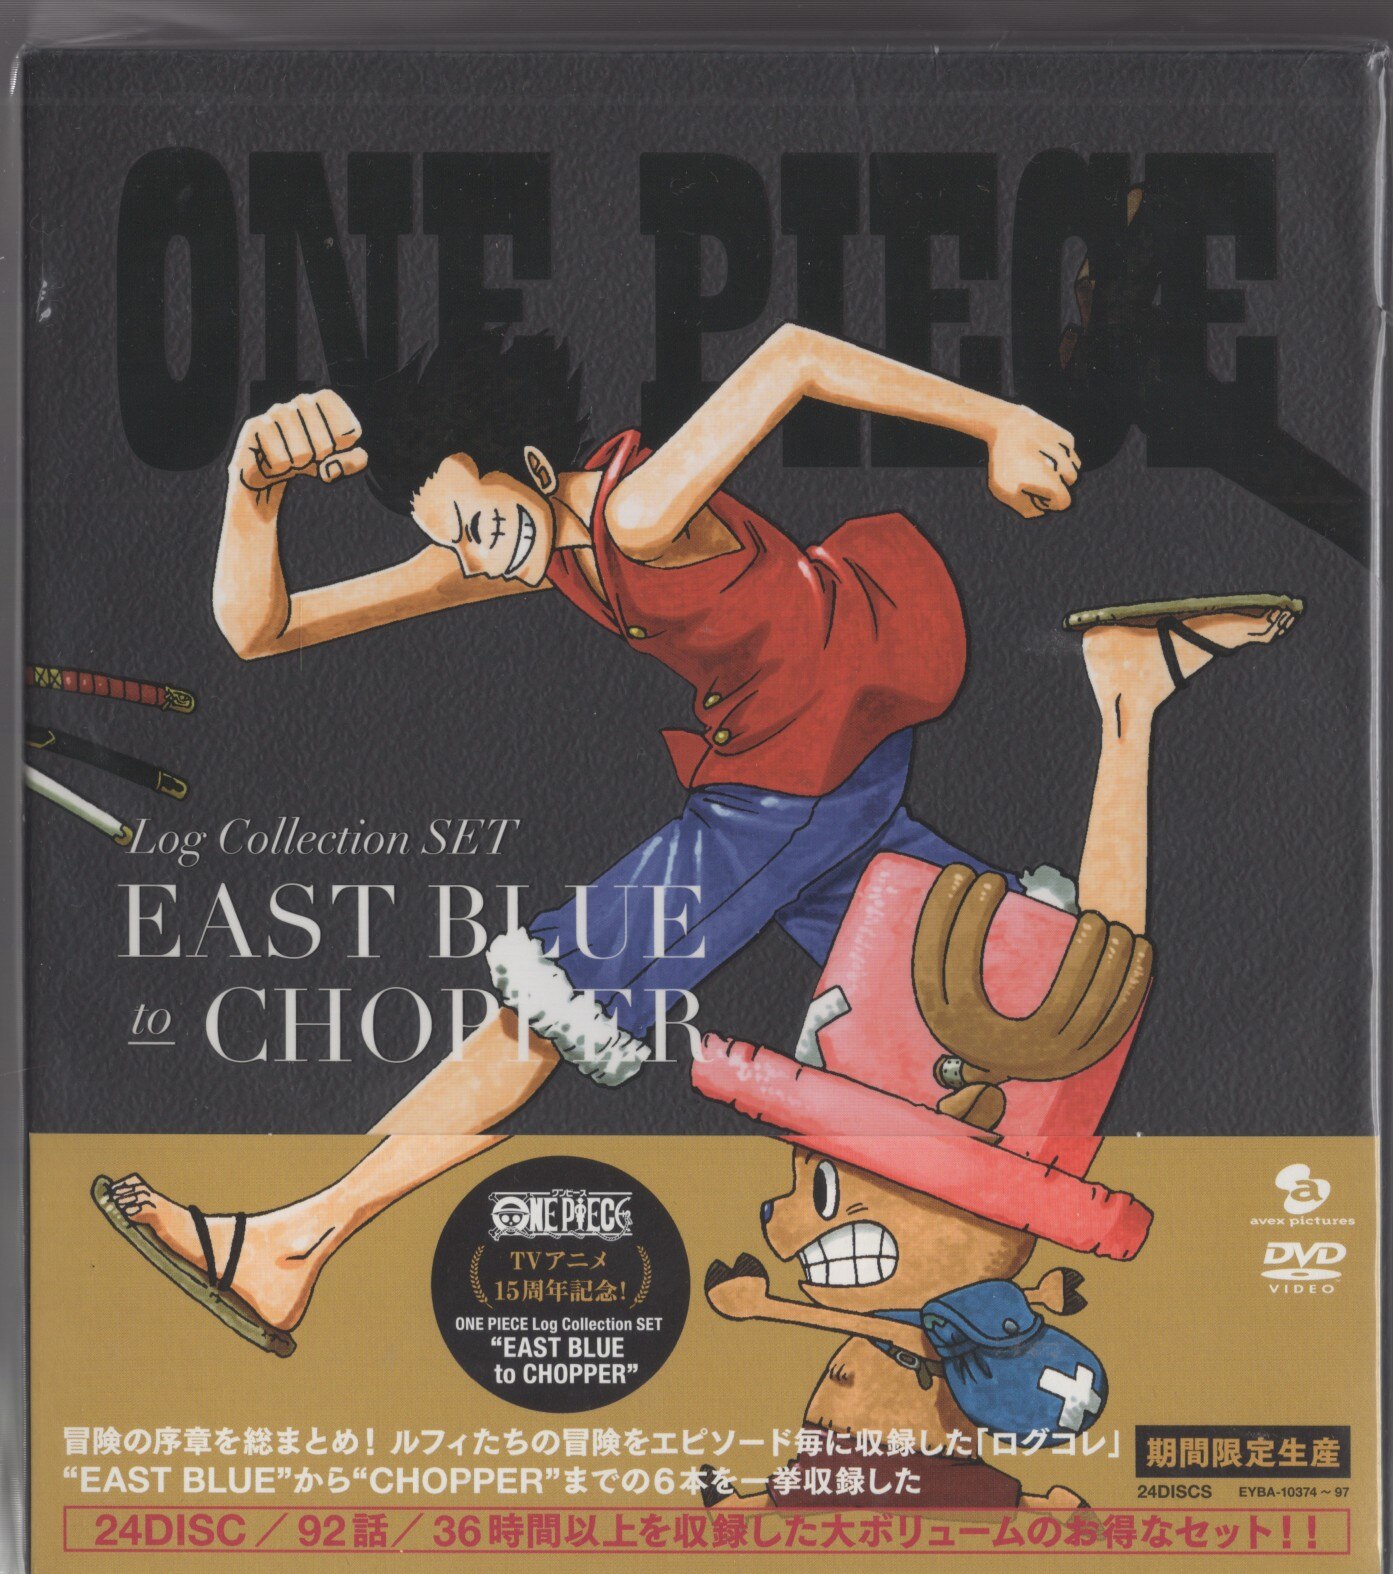 ONE PIECE Log Collection SET EAST BLUE to CHOPPER DVD